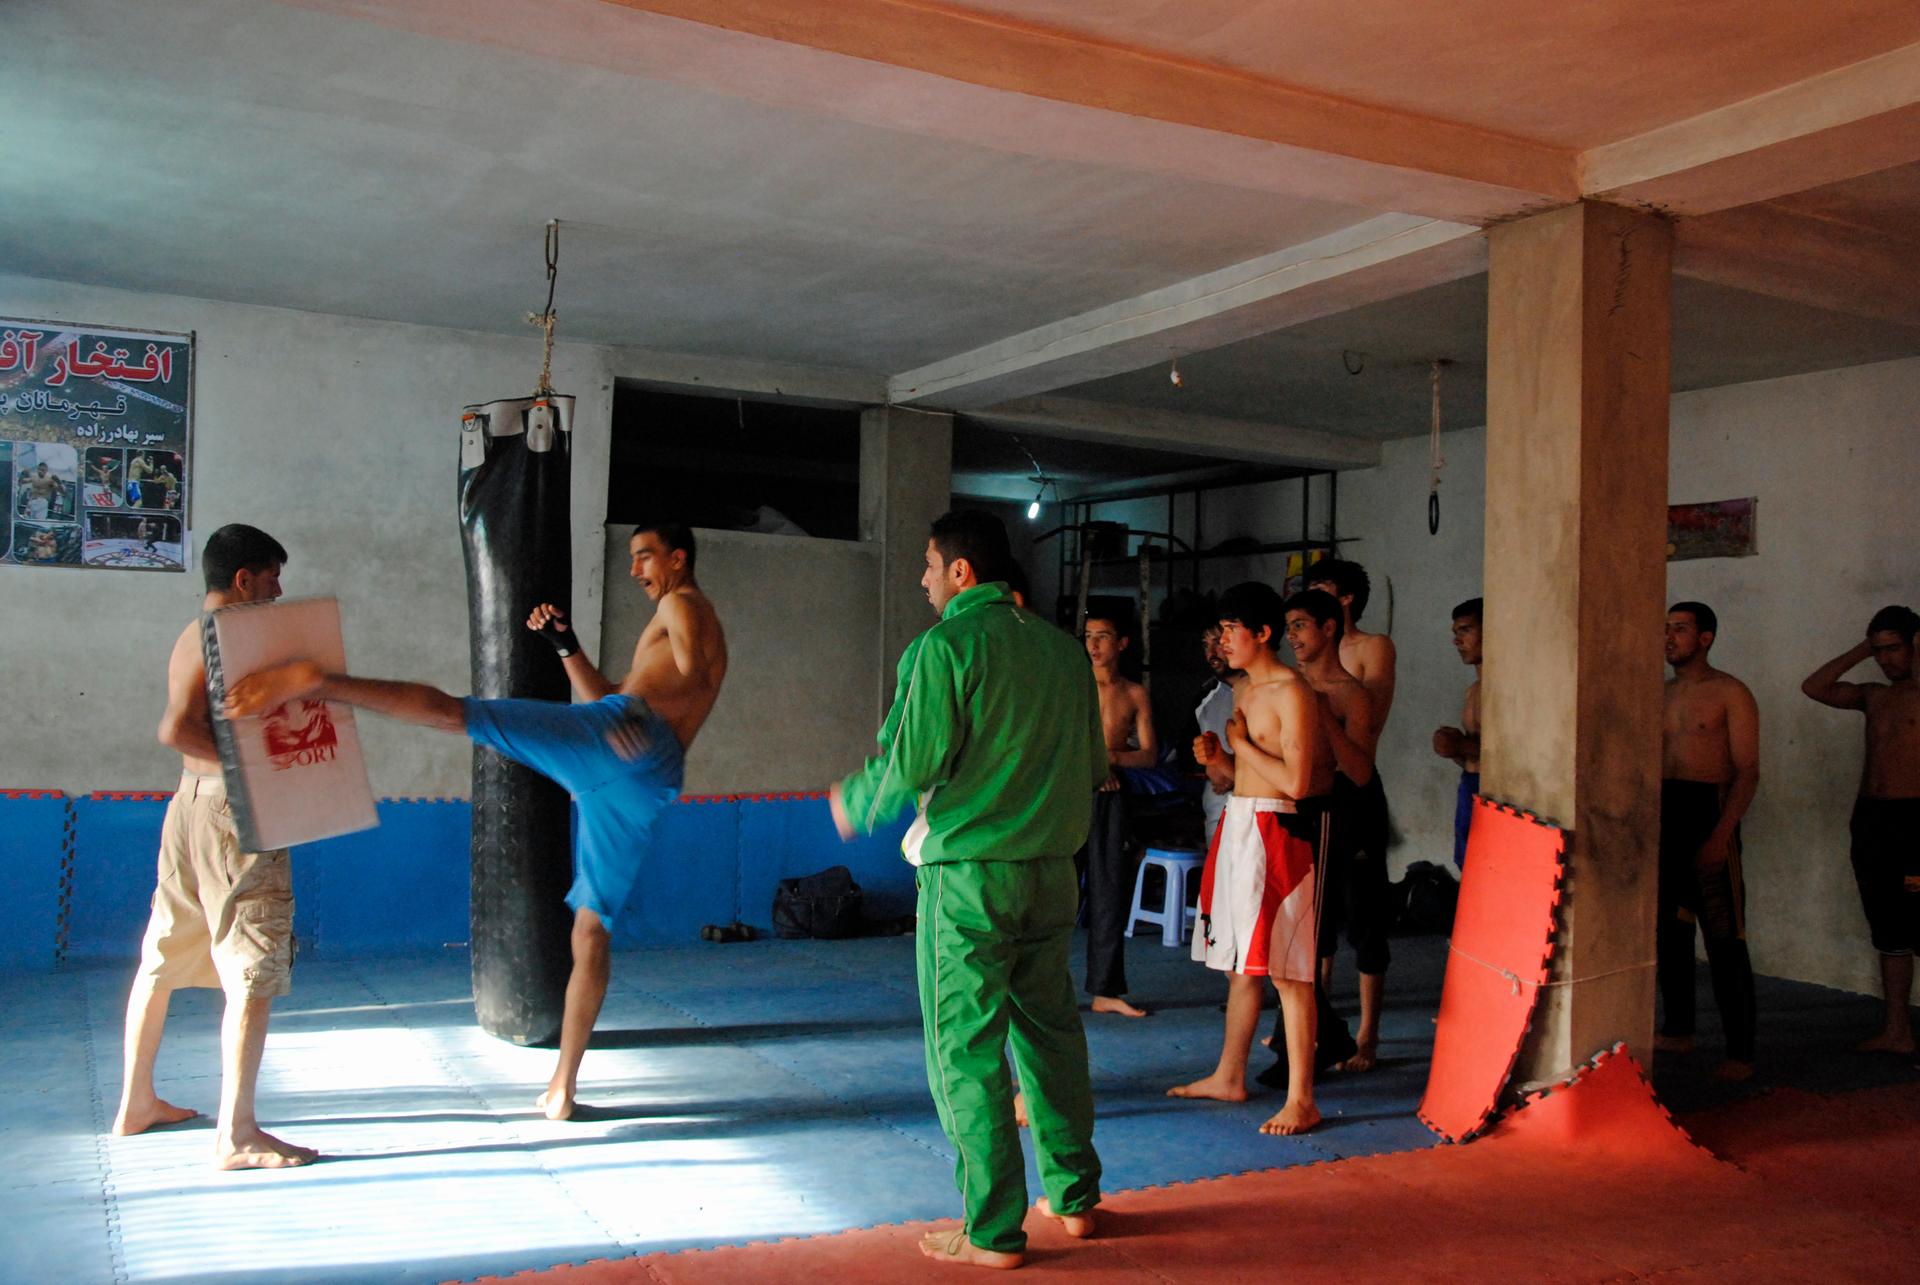 A Free Fight Club, the latest craze among the youngsters in Kabul. Young people go to such clubs to learn the techniques of martial arts. Championships provide good monetary rewards for the winners.